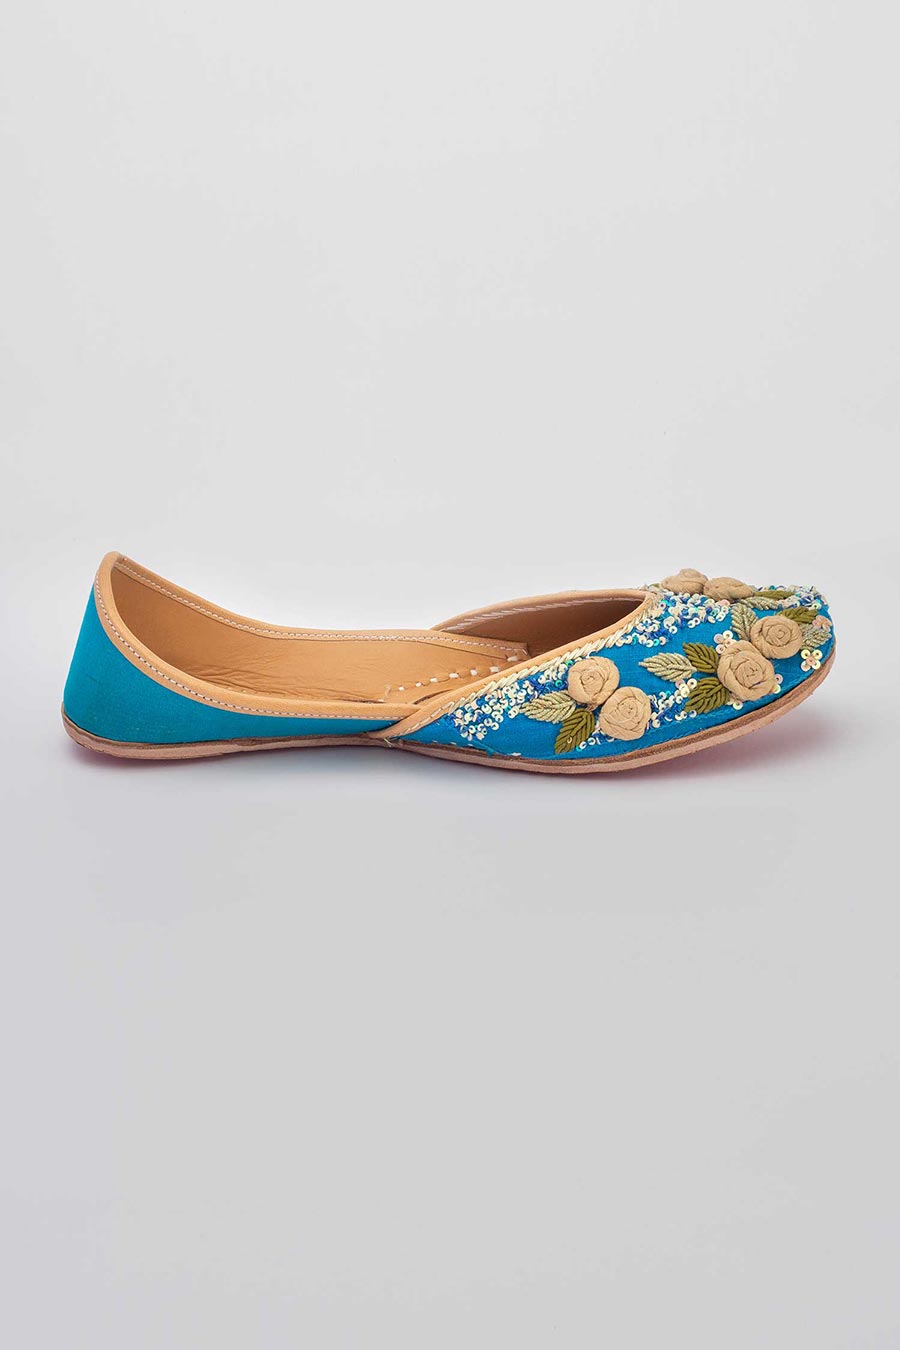 Hand Embroidered Blue Floral Jutti